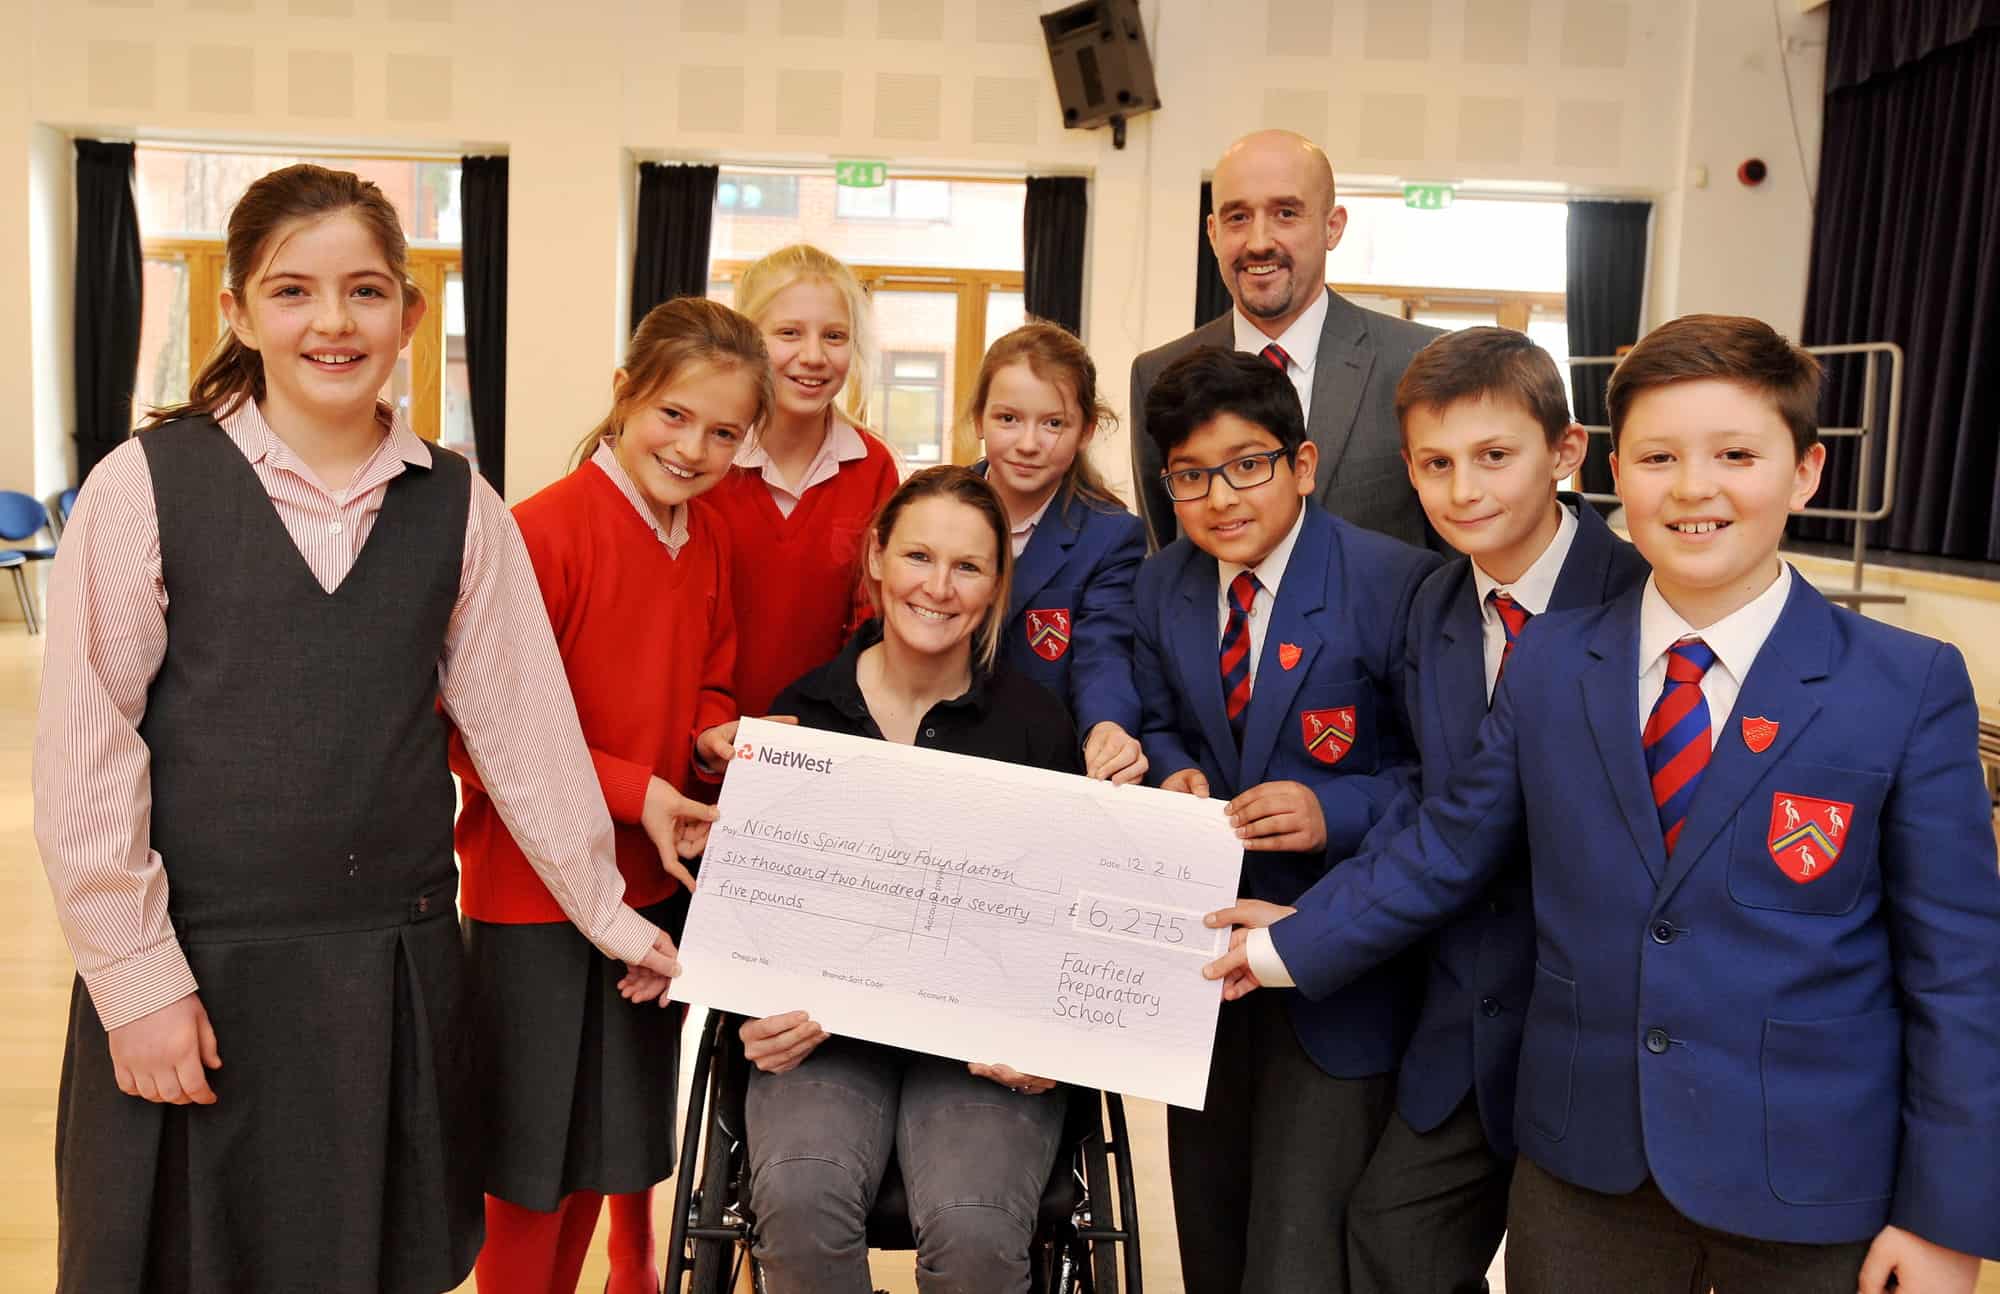 Pupils put on their dancing shoes in aid of spinal injury research featured image